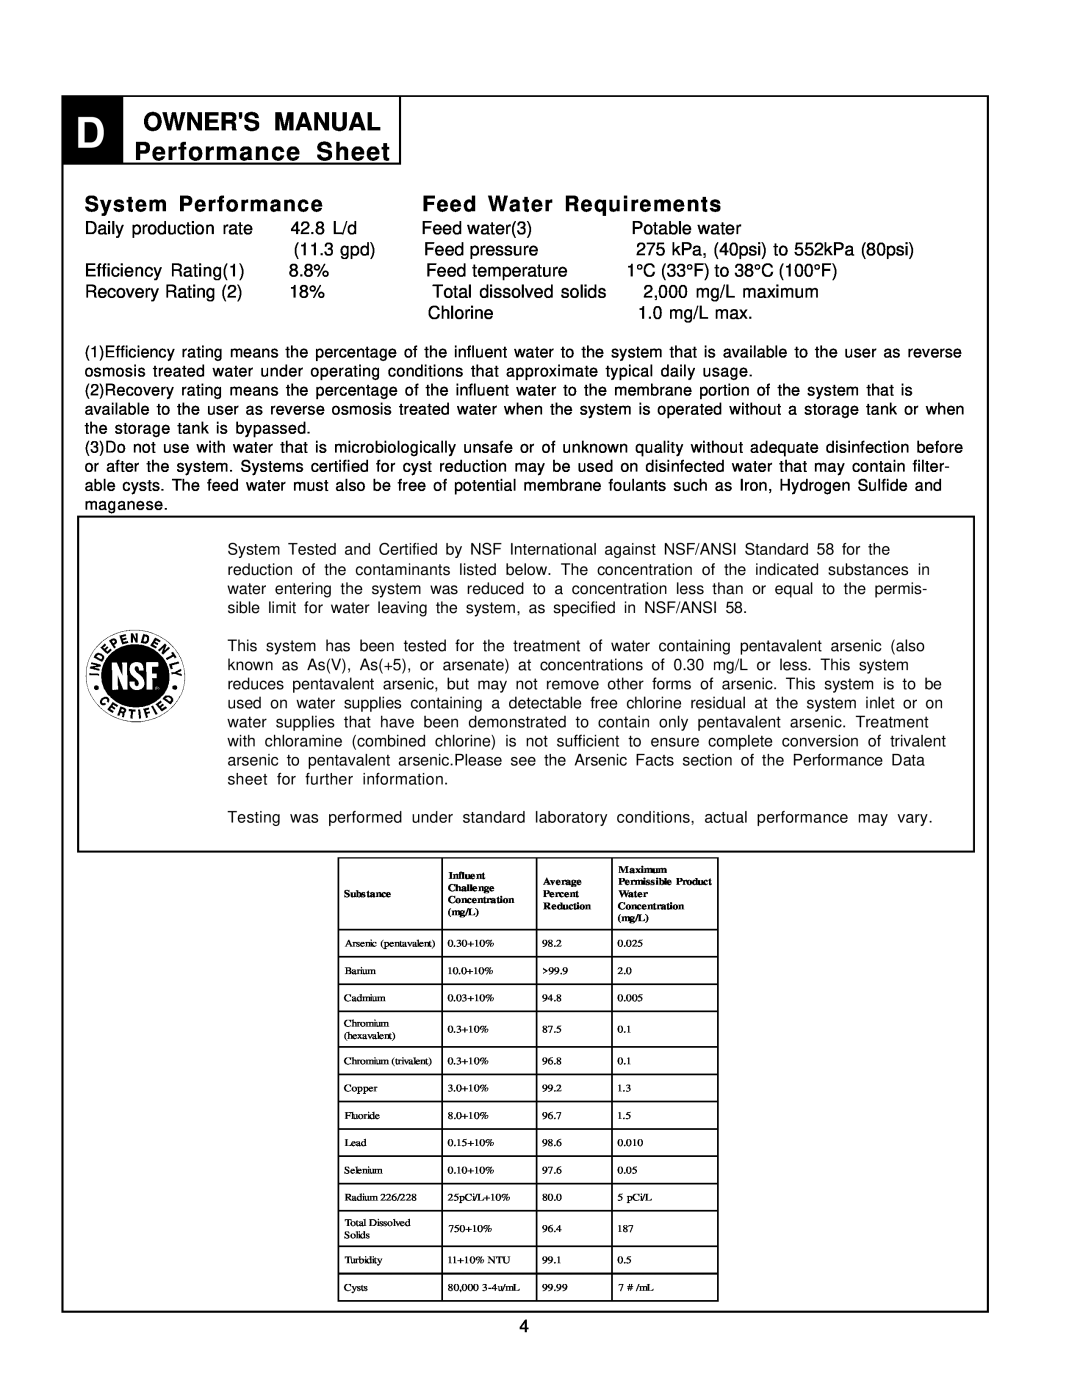 Sierra PN103257, SIERRA REVERSE OSMOSIS DRINKING WATER SYSTEM owner manual System Performance, Feed Water Requirements 